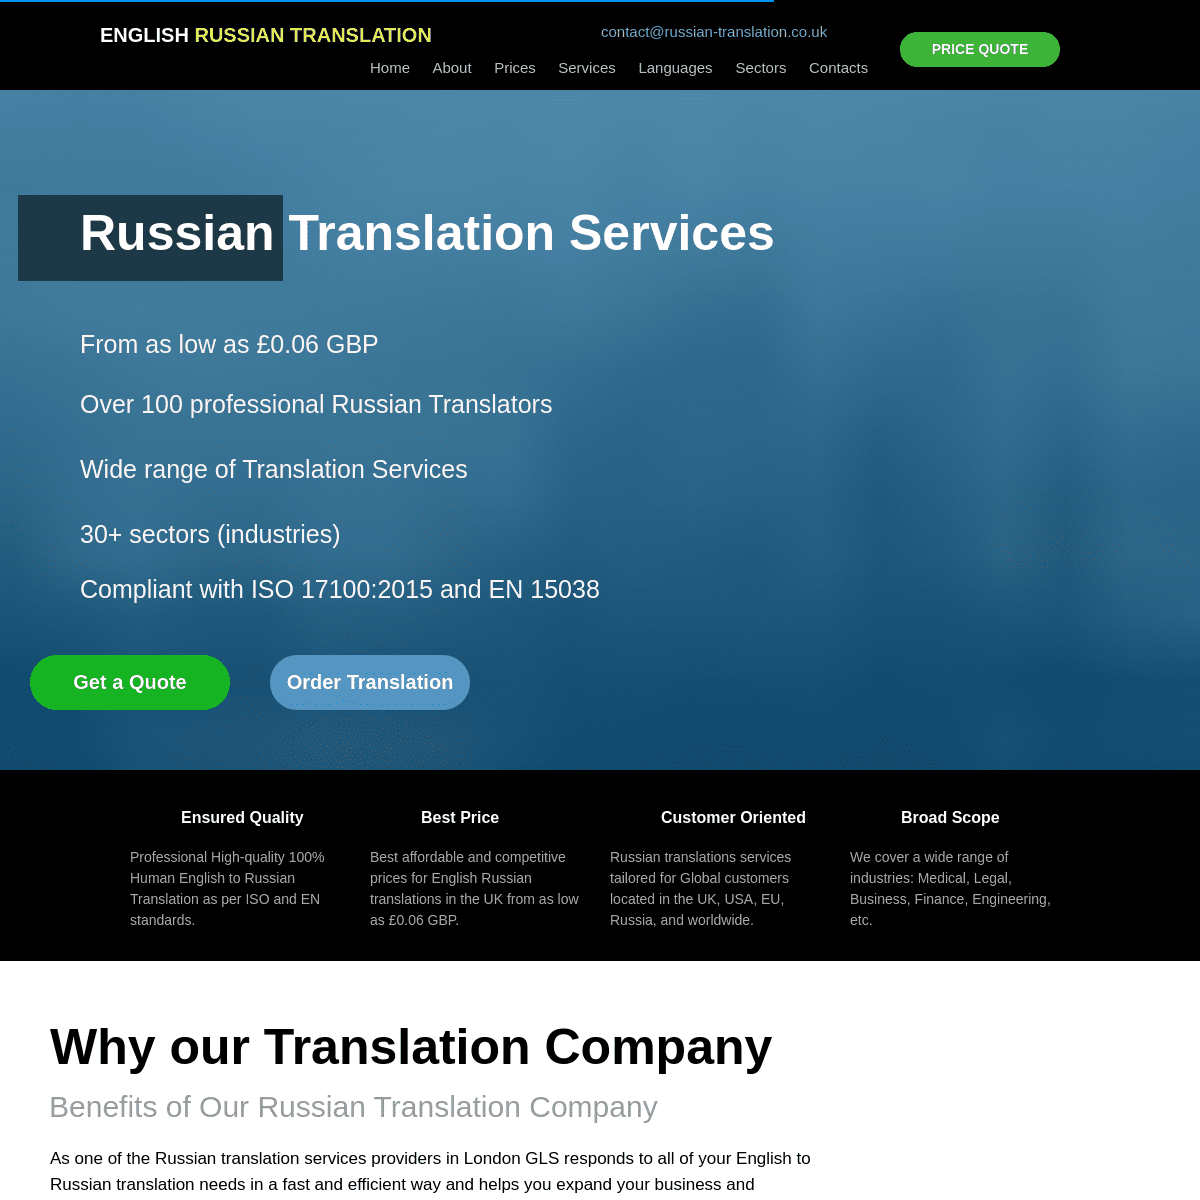 A complete backup of https://russian-translation.co.uk